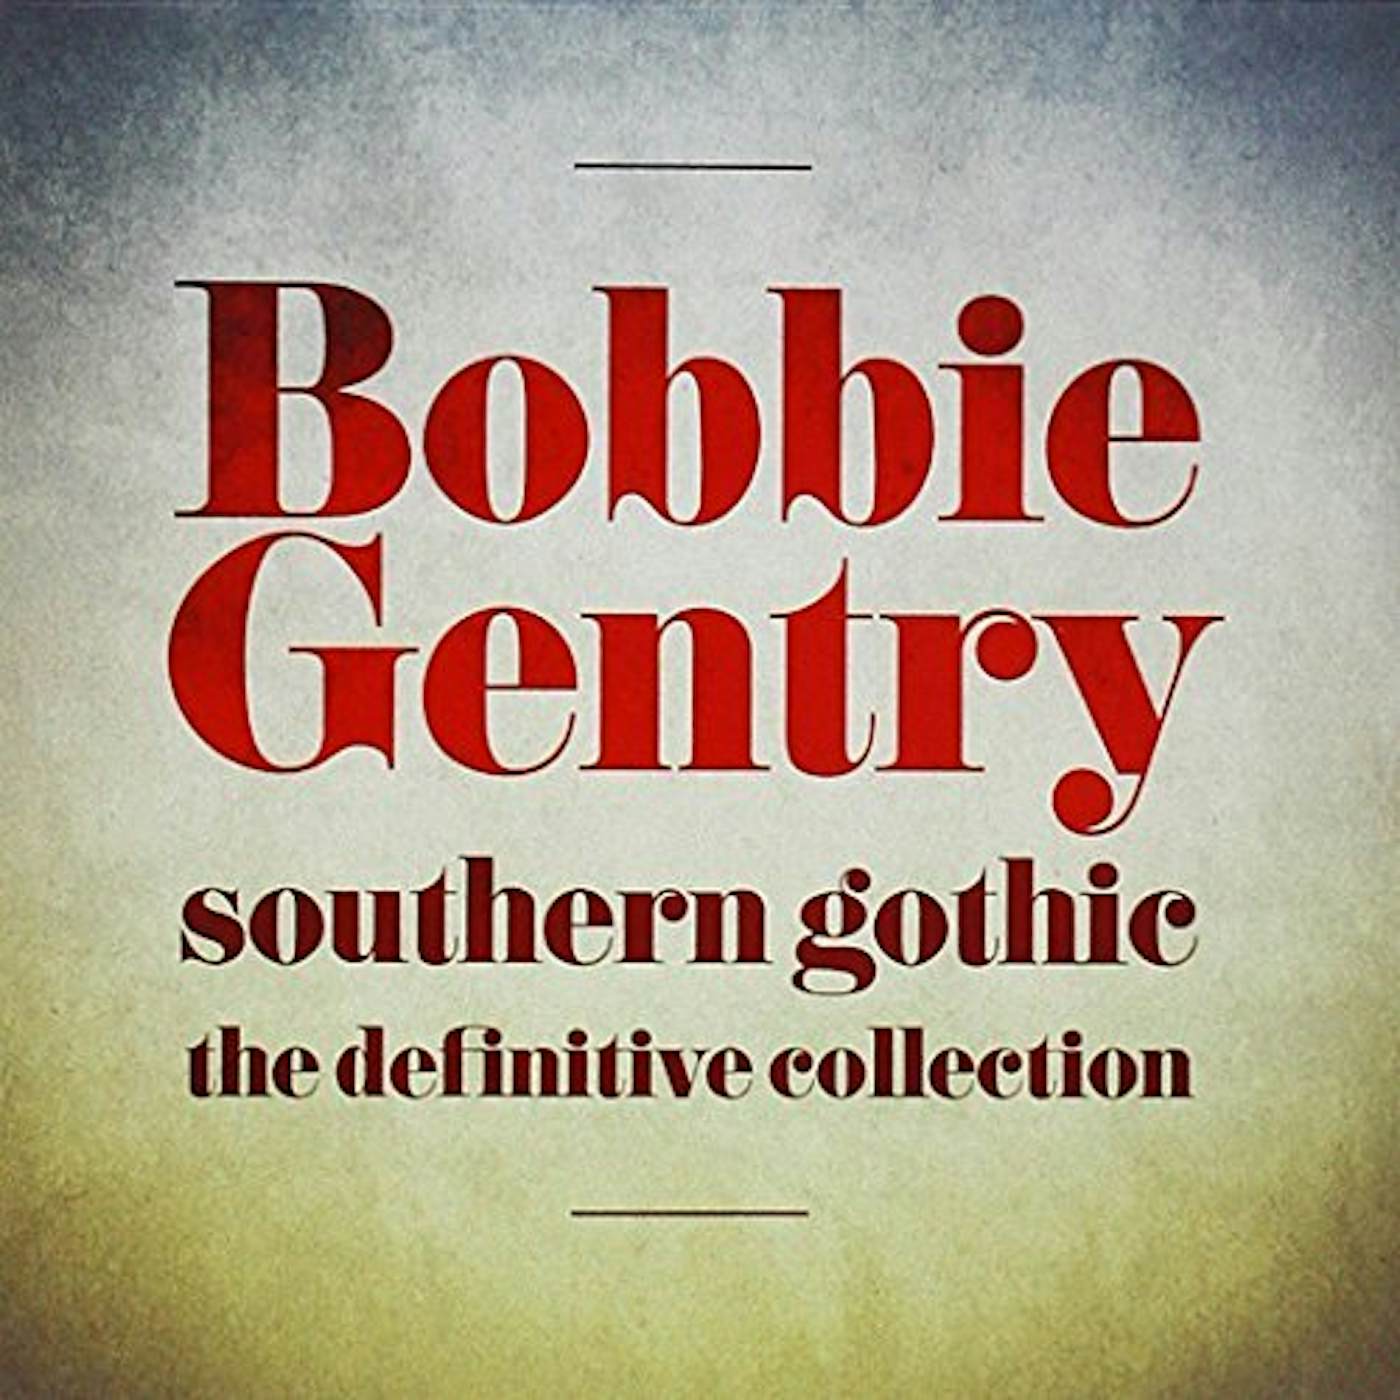 Bobbie Gentry DEFINITIVE COLLECTION CD